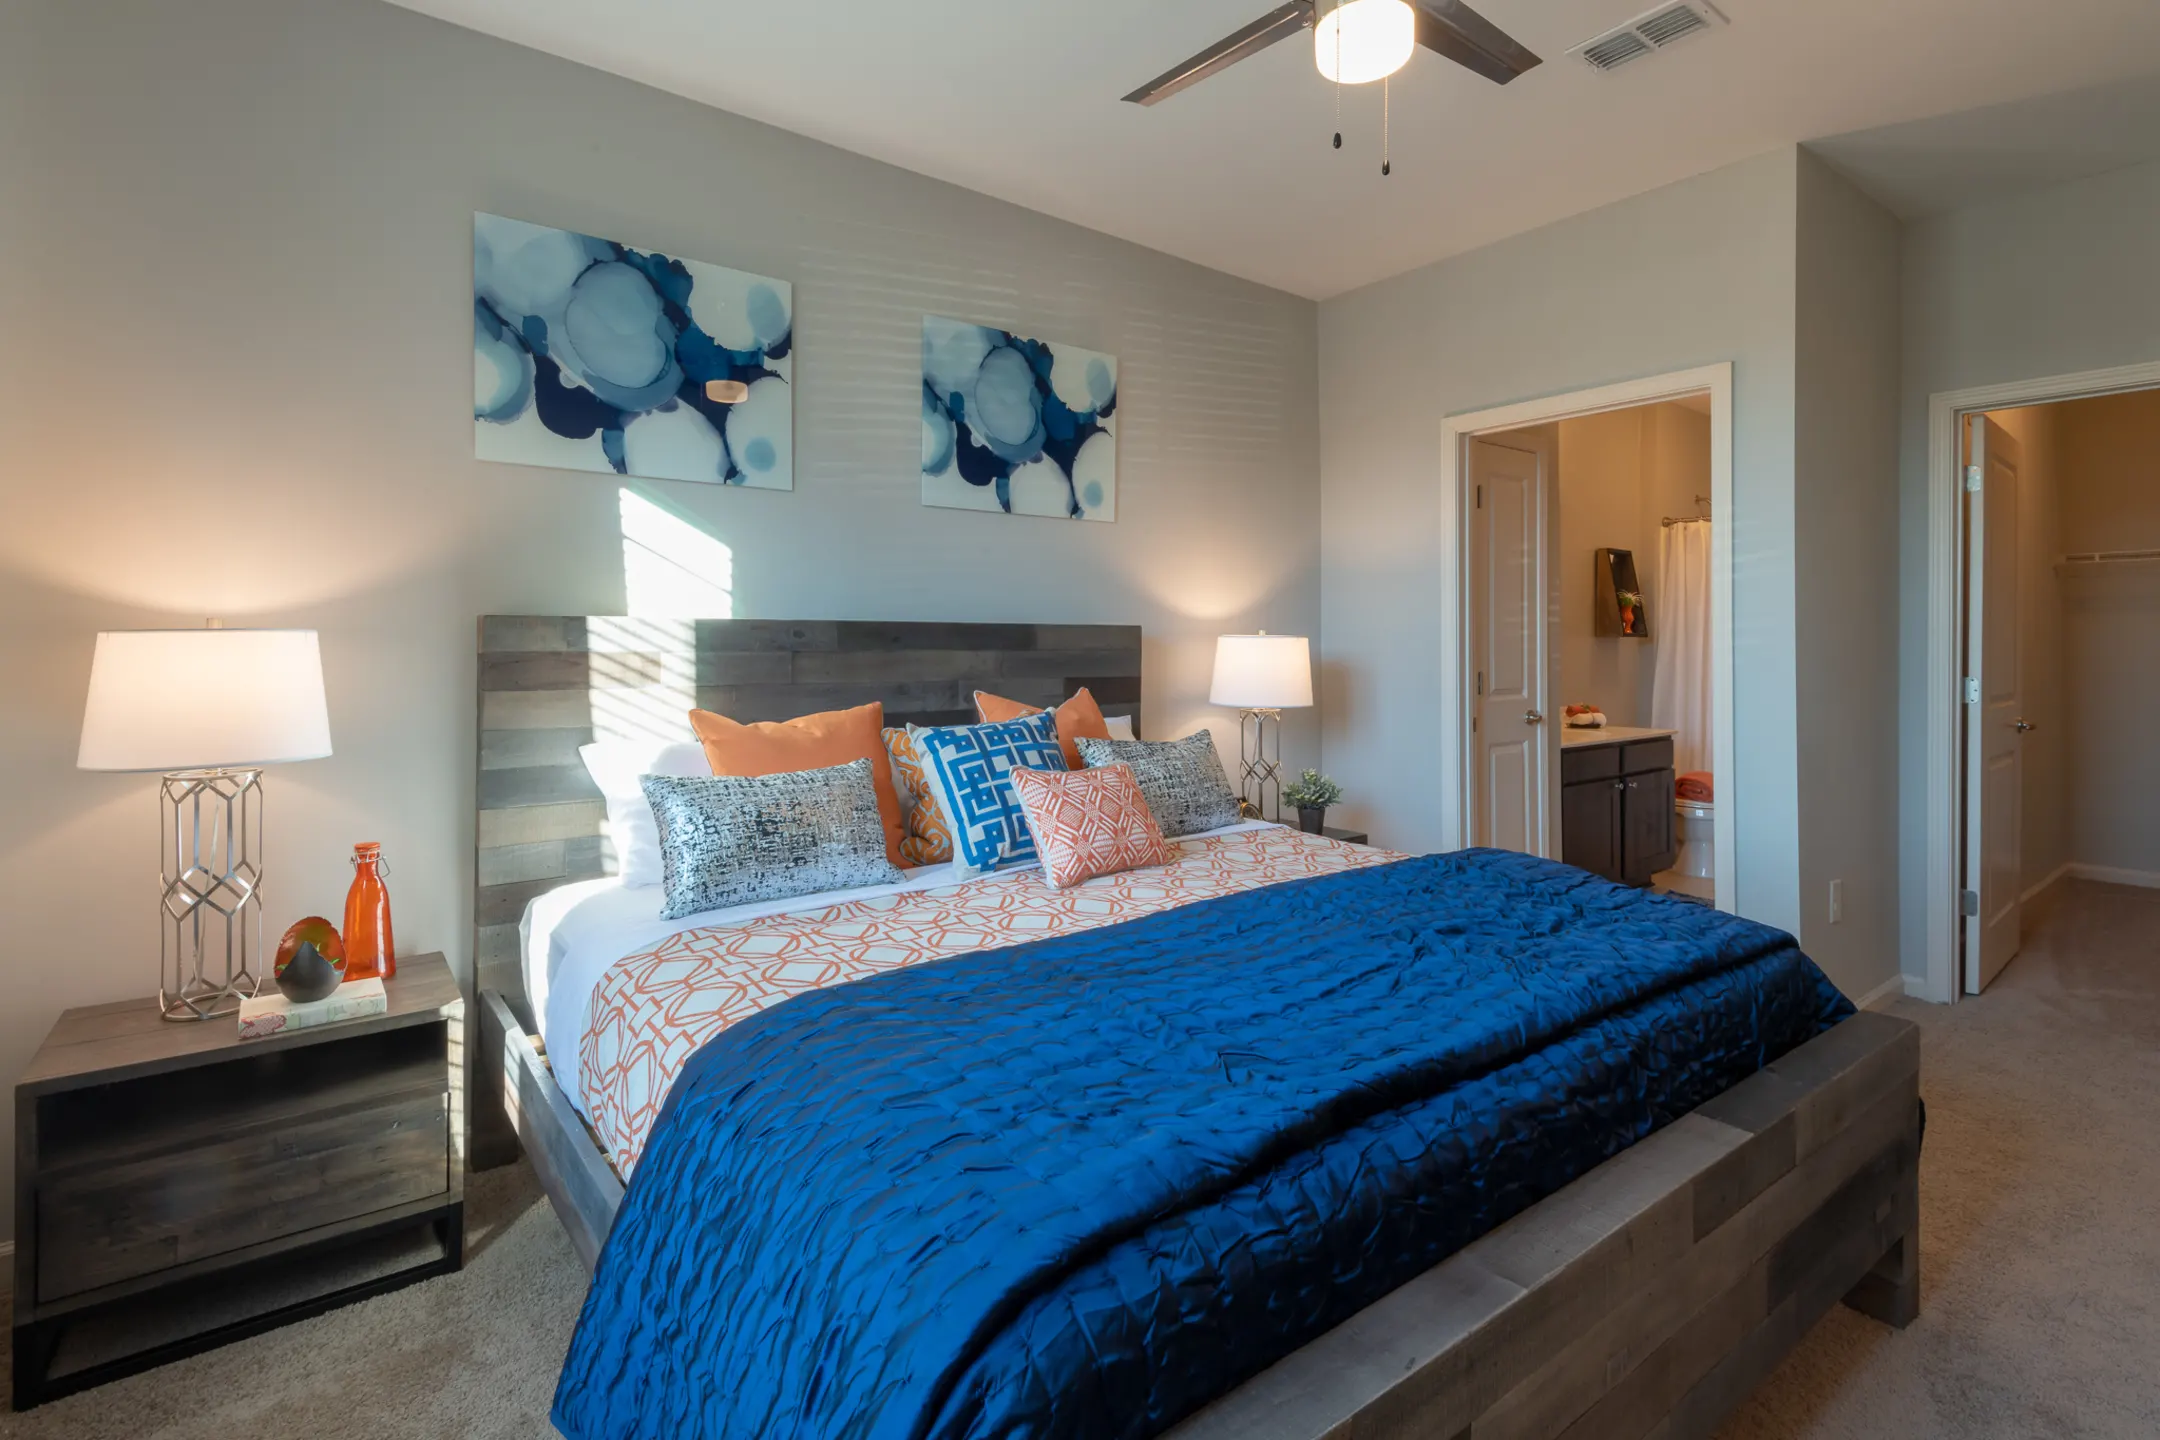 Bedroom - The Crest At Brier Creek Apartments - Raleigh, NC